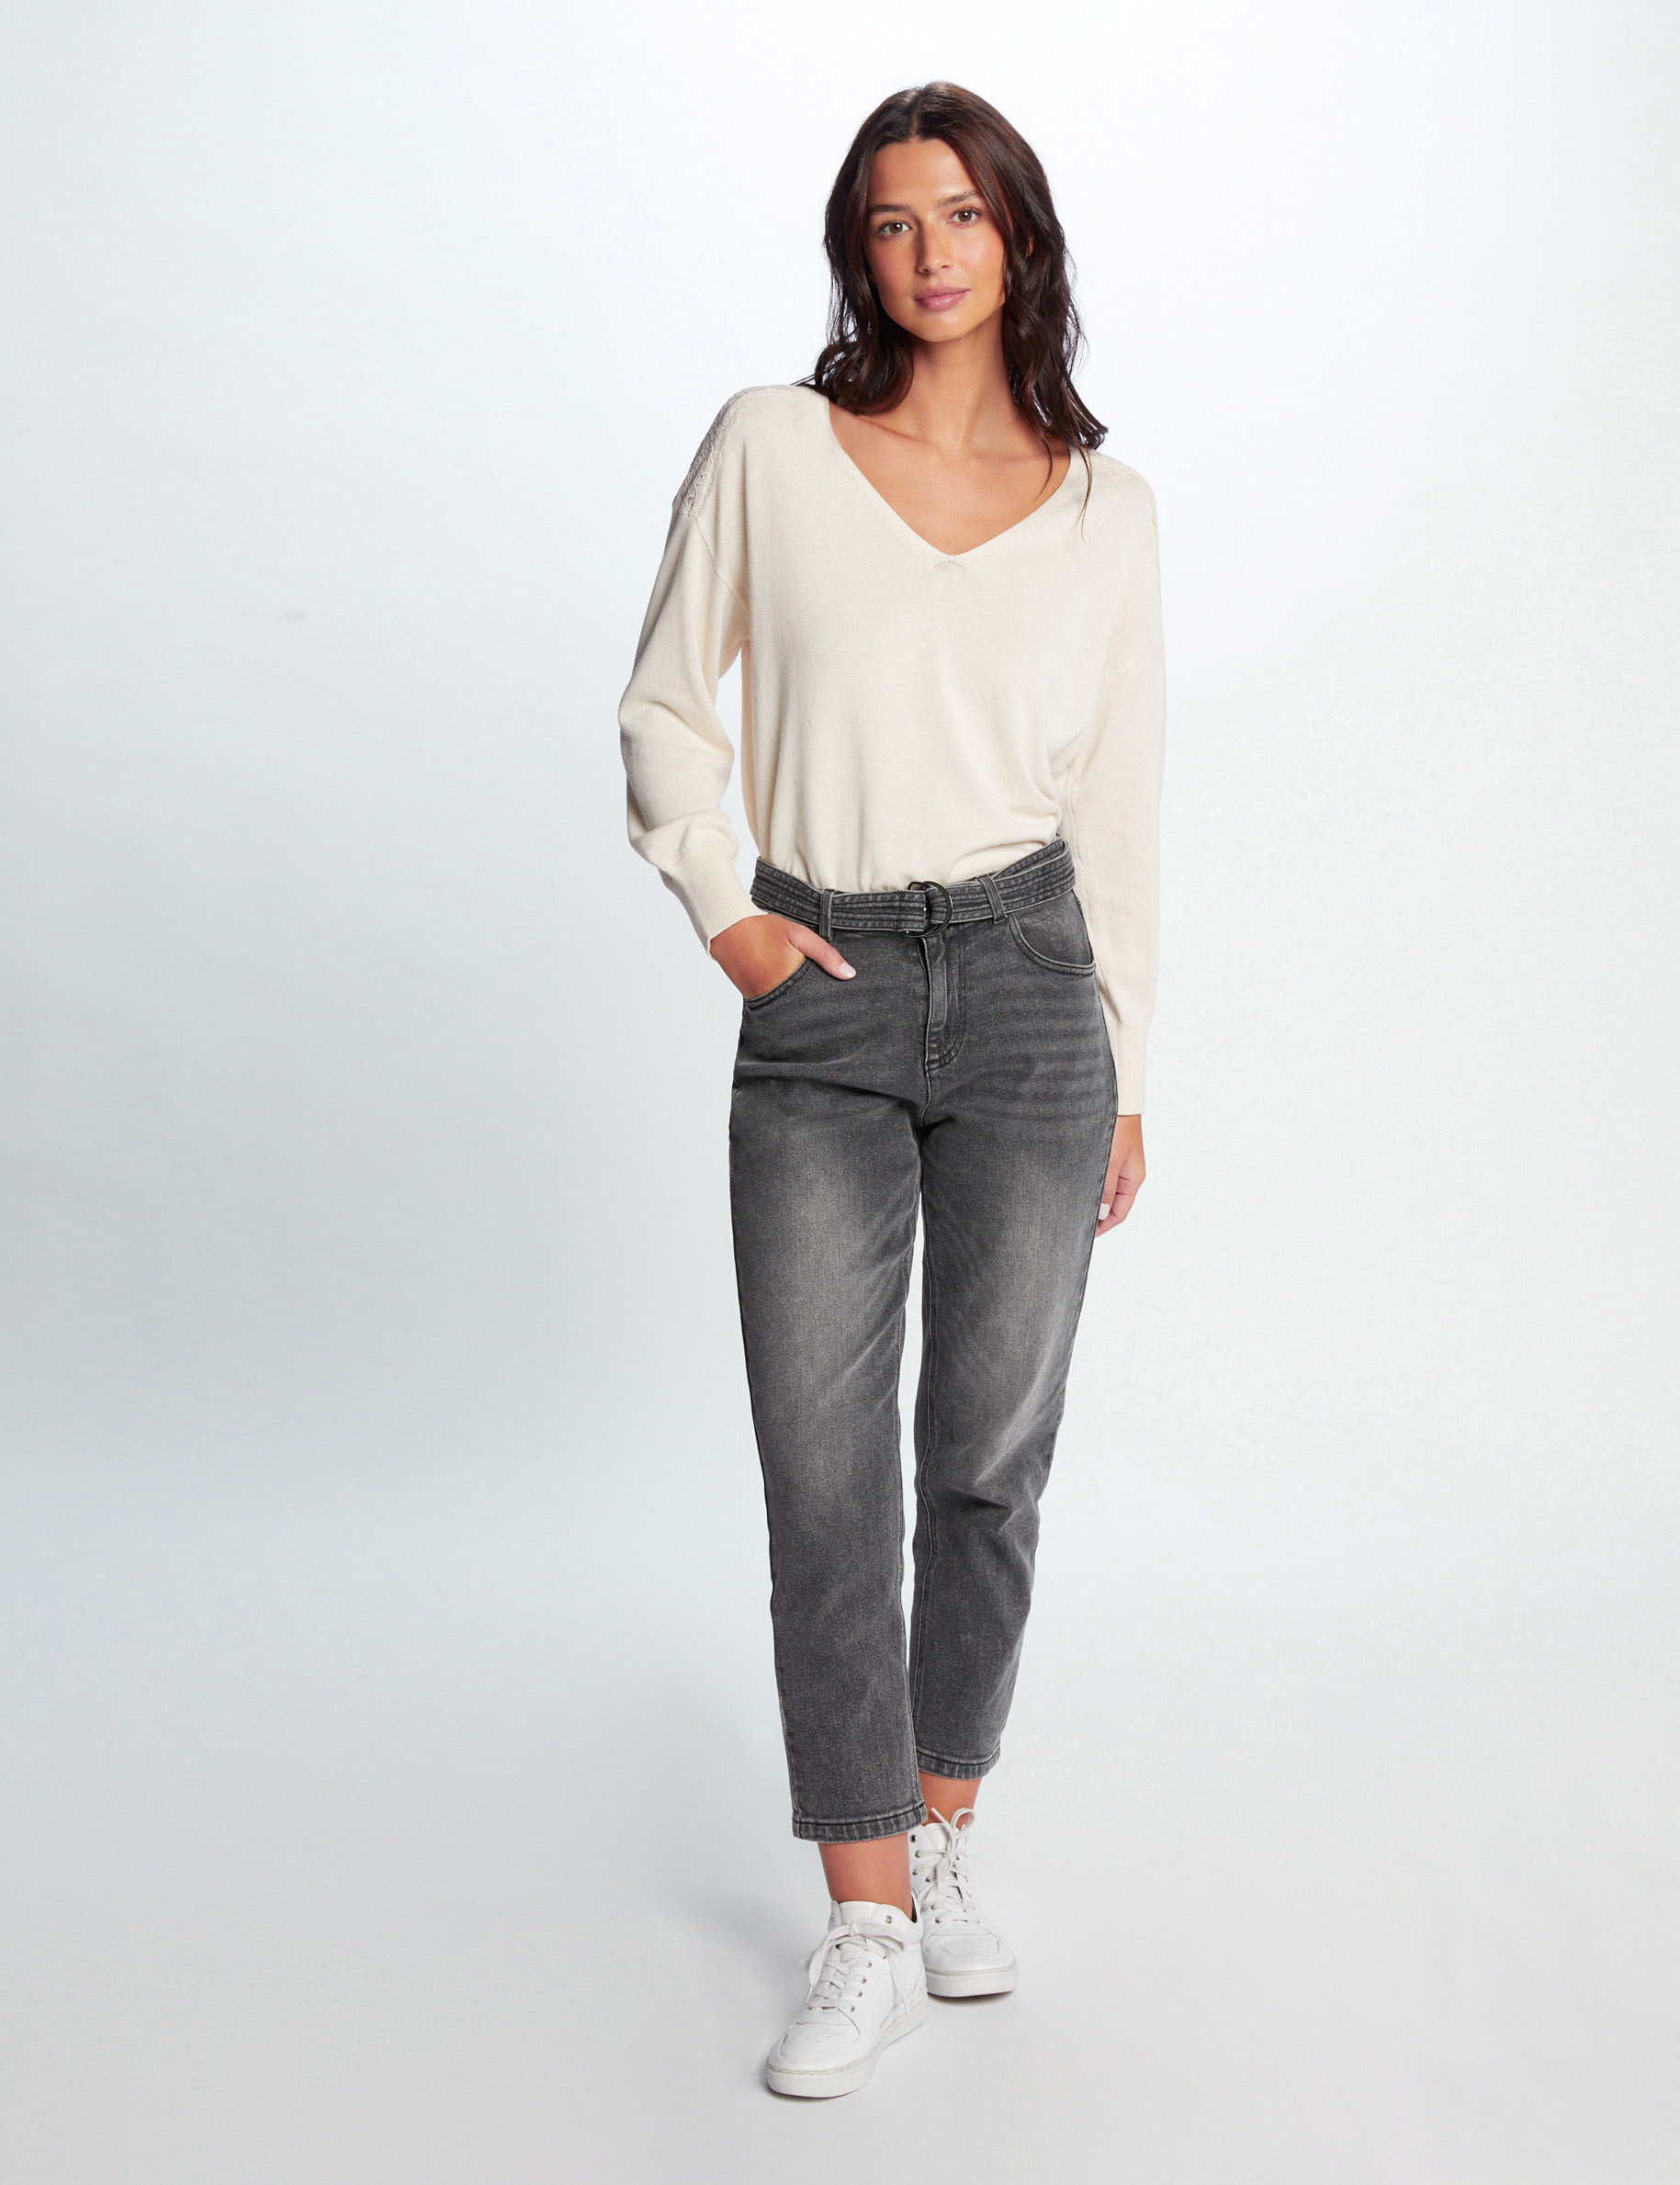 Jumper V-neck and long sleeves ivory ladies'